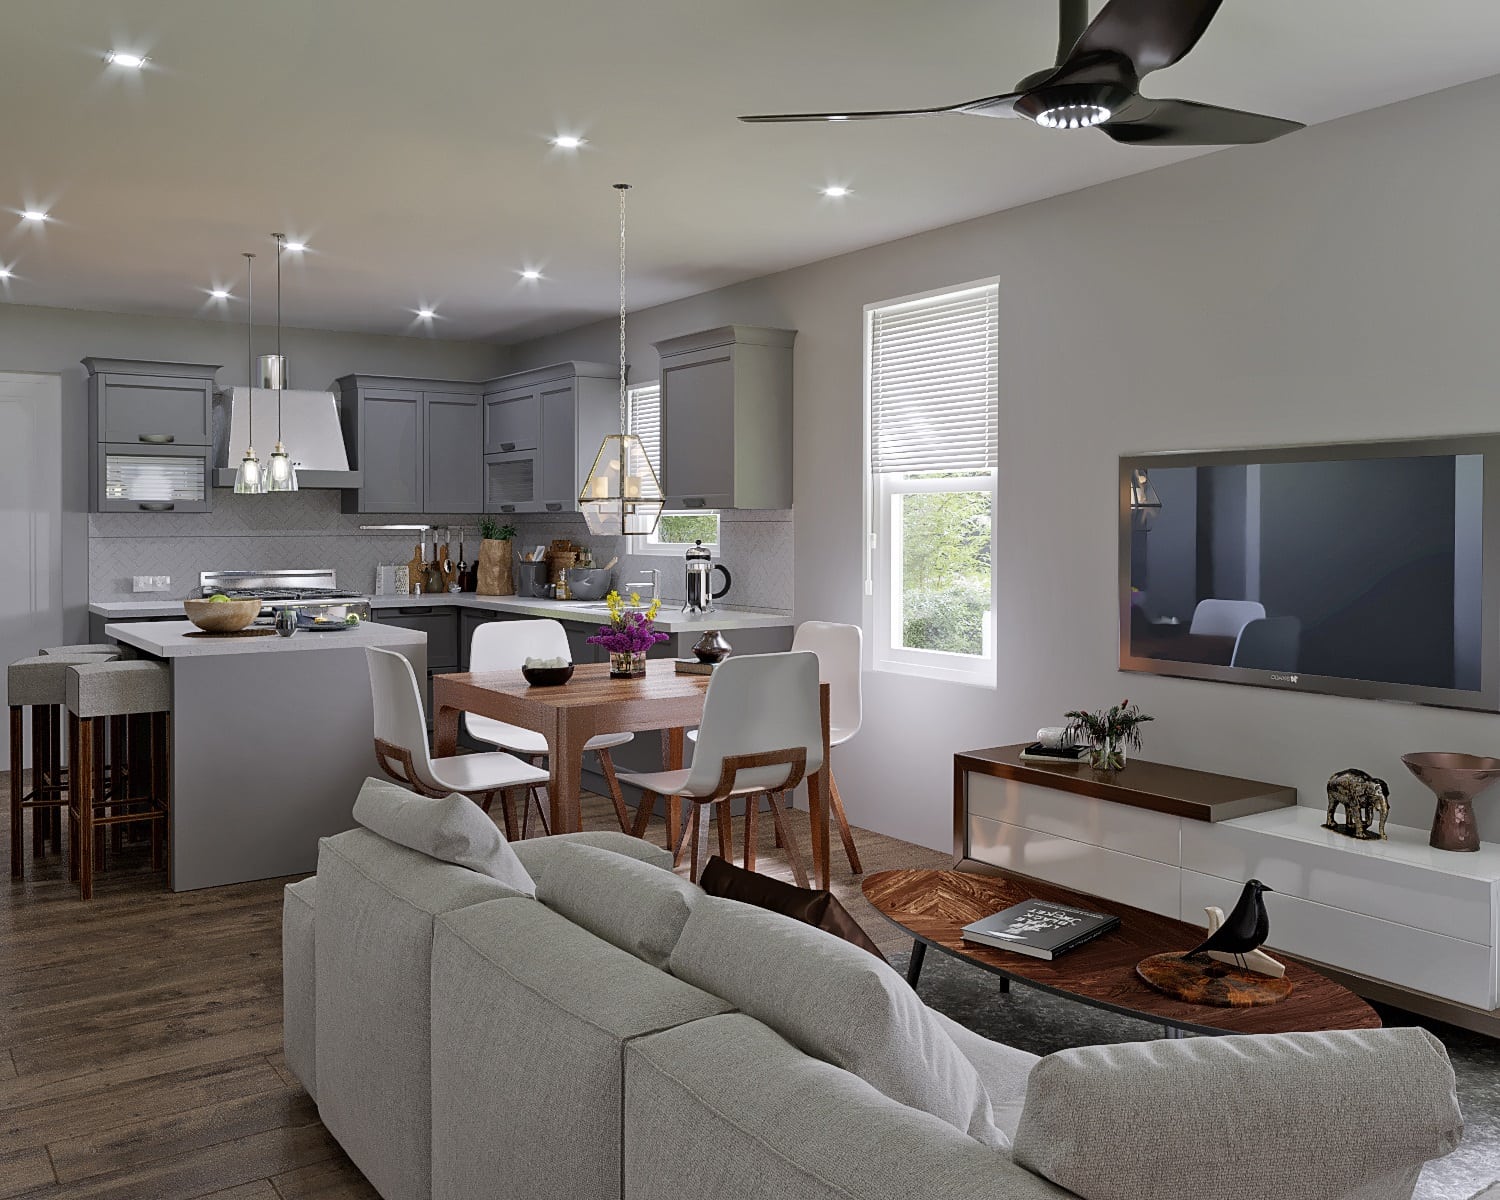 Kitchen and Living Room Interior Rendering